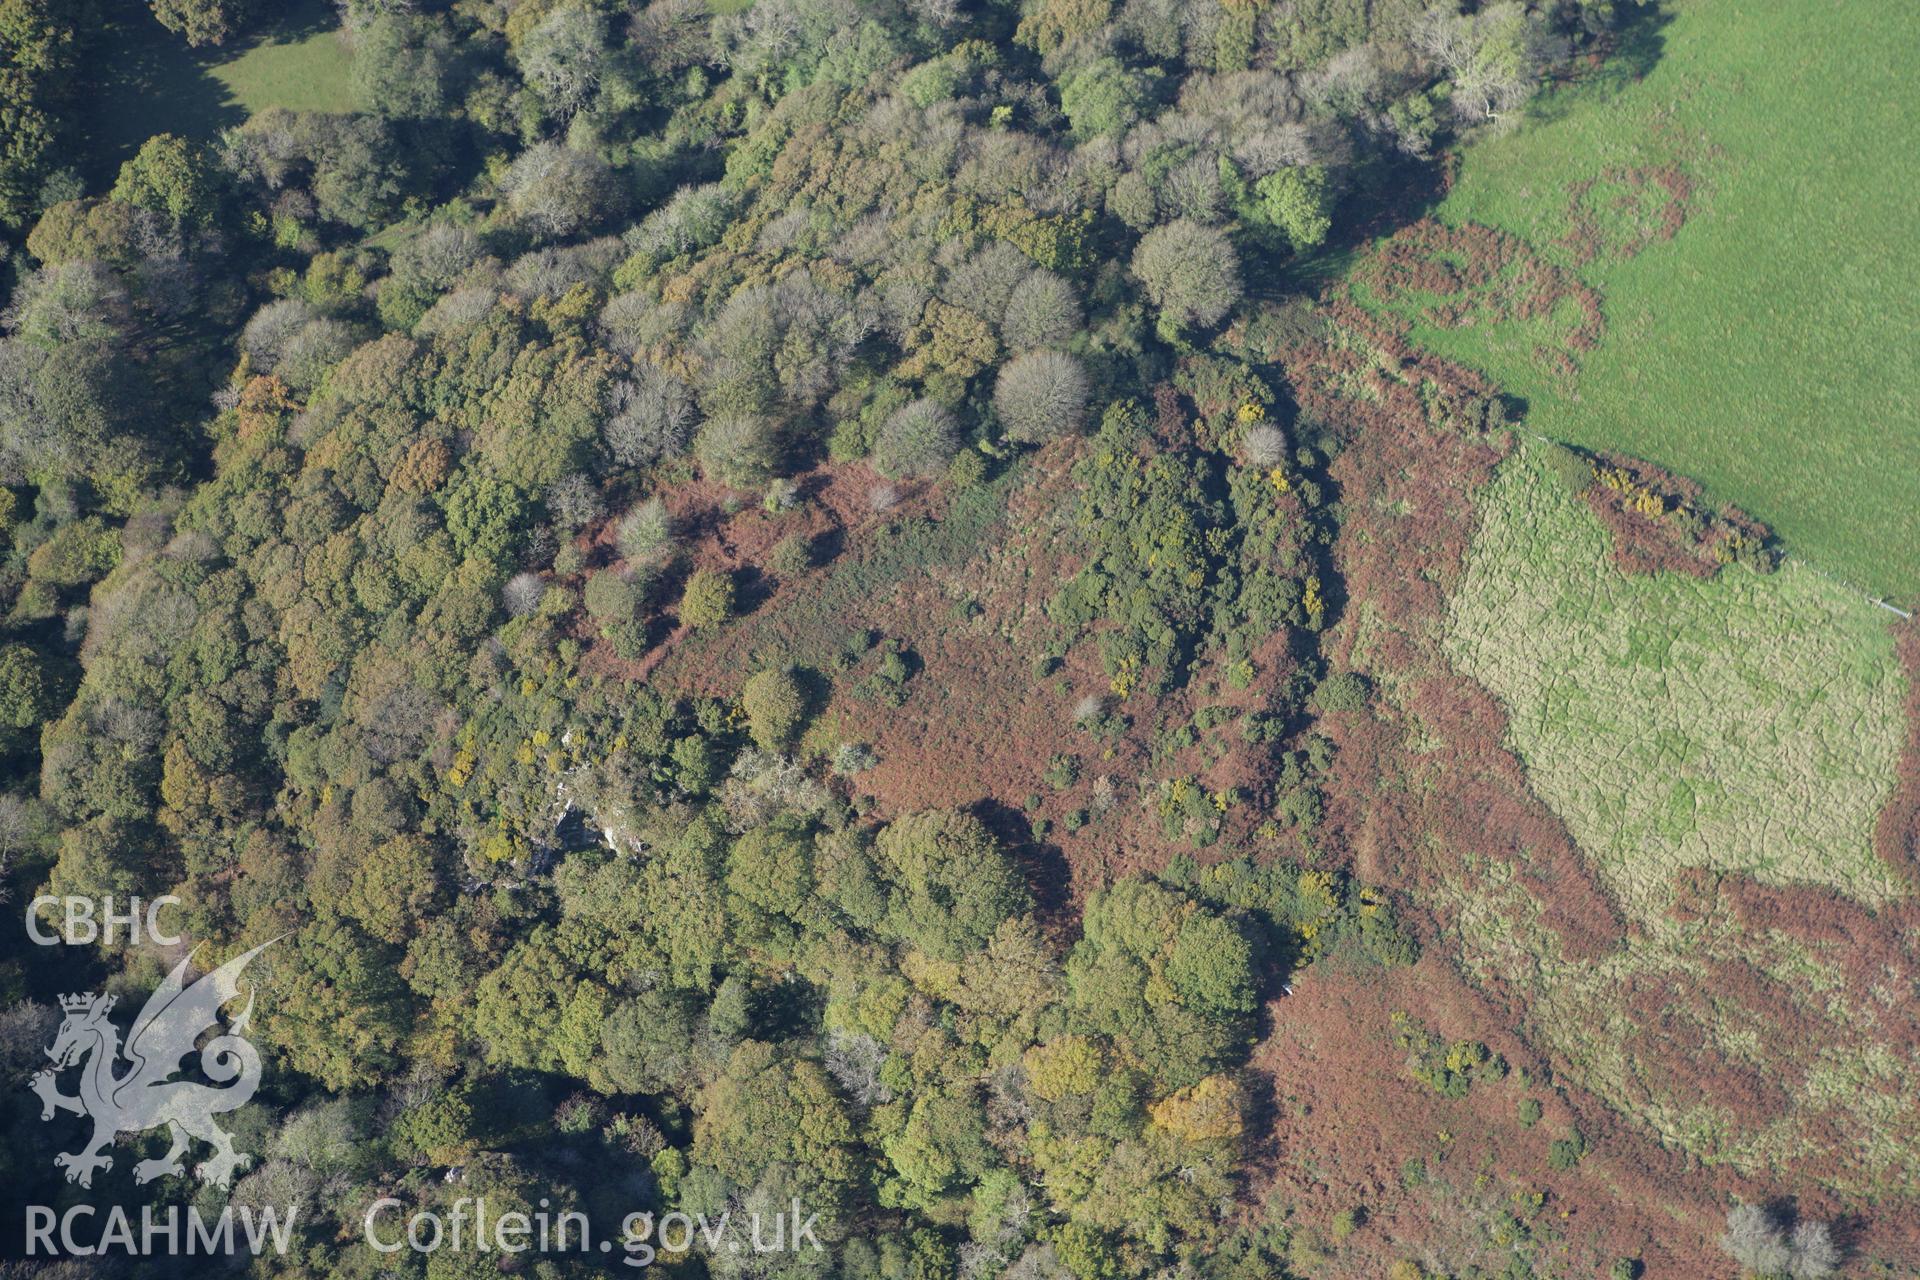 RCAHMW colour oblique photograph of Cwm-pen-y-benglog;Allt-y-castell. Taken by Toby Driver on 23/10/2007.